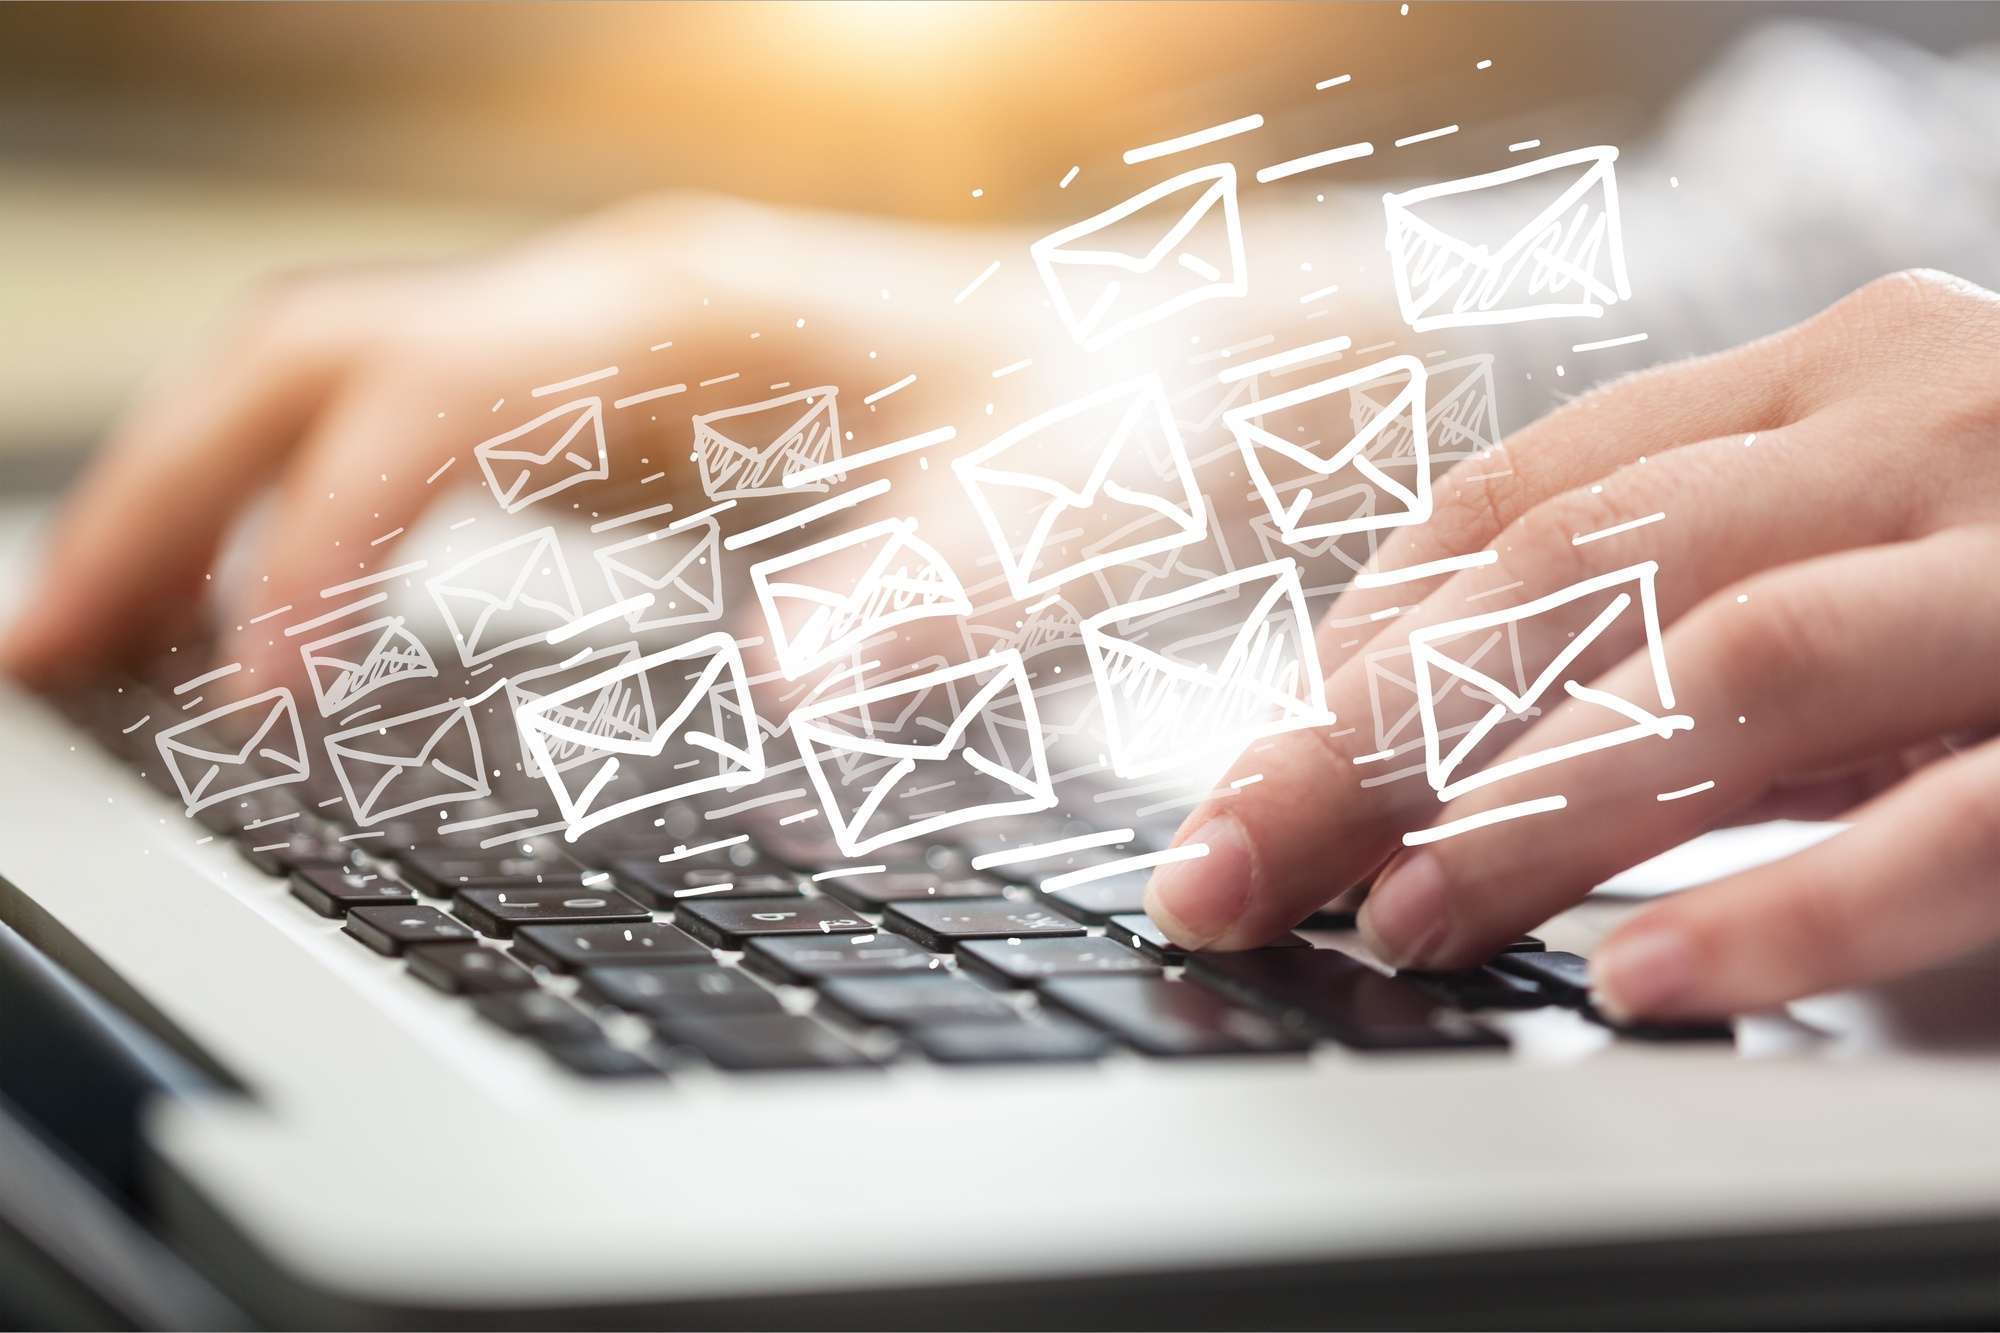 email migration